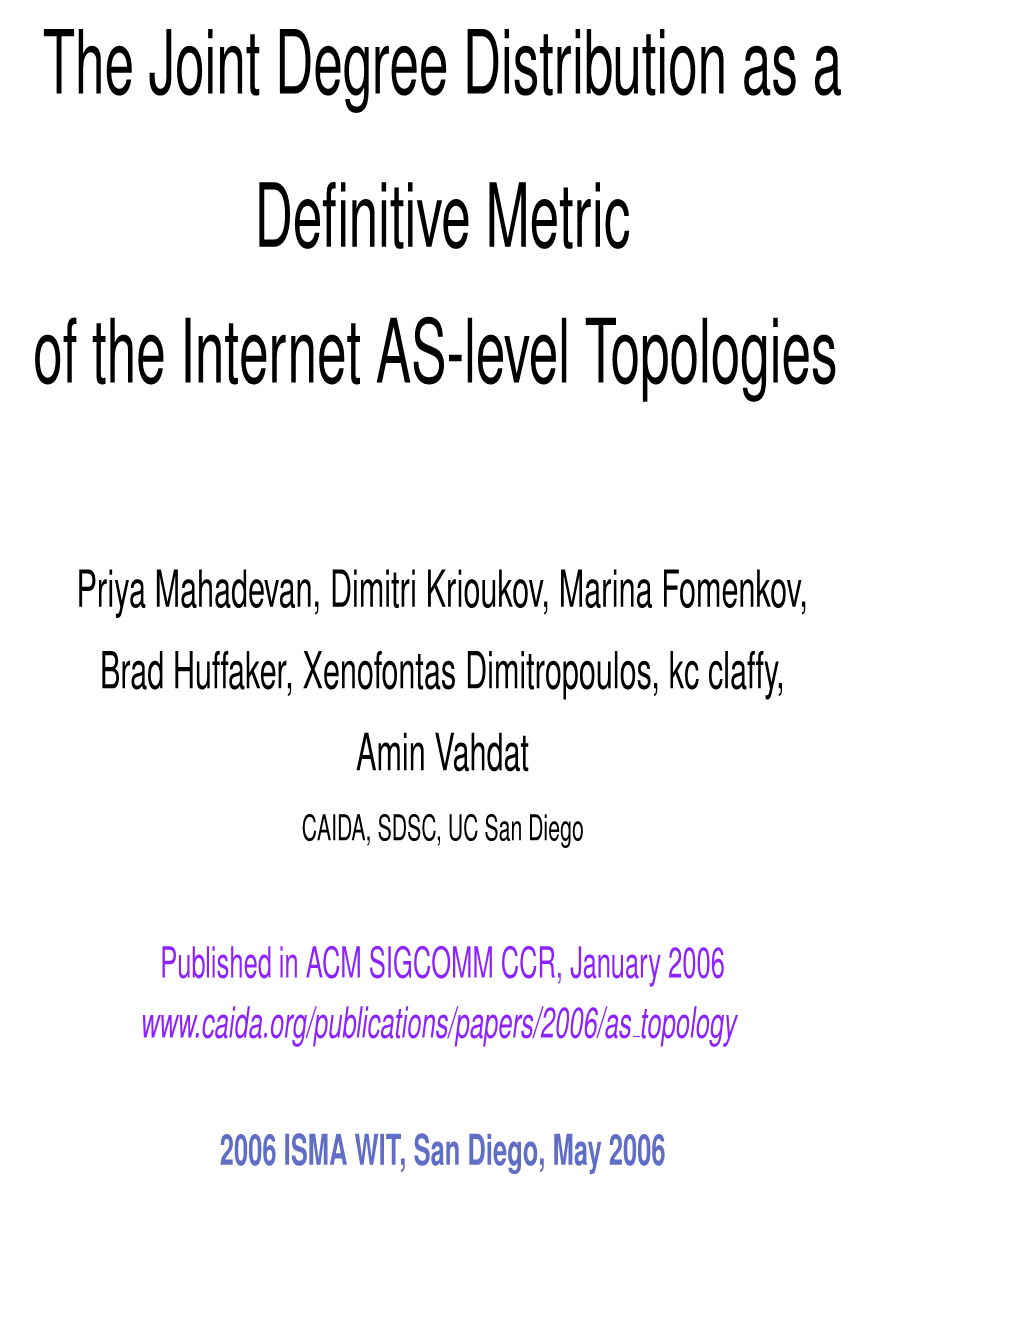 Joint Degree Distribution As a Deﬁnitive Metric of the Internet AS-Level Topologies